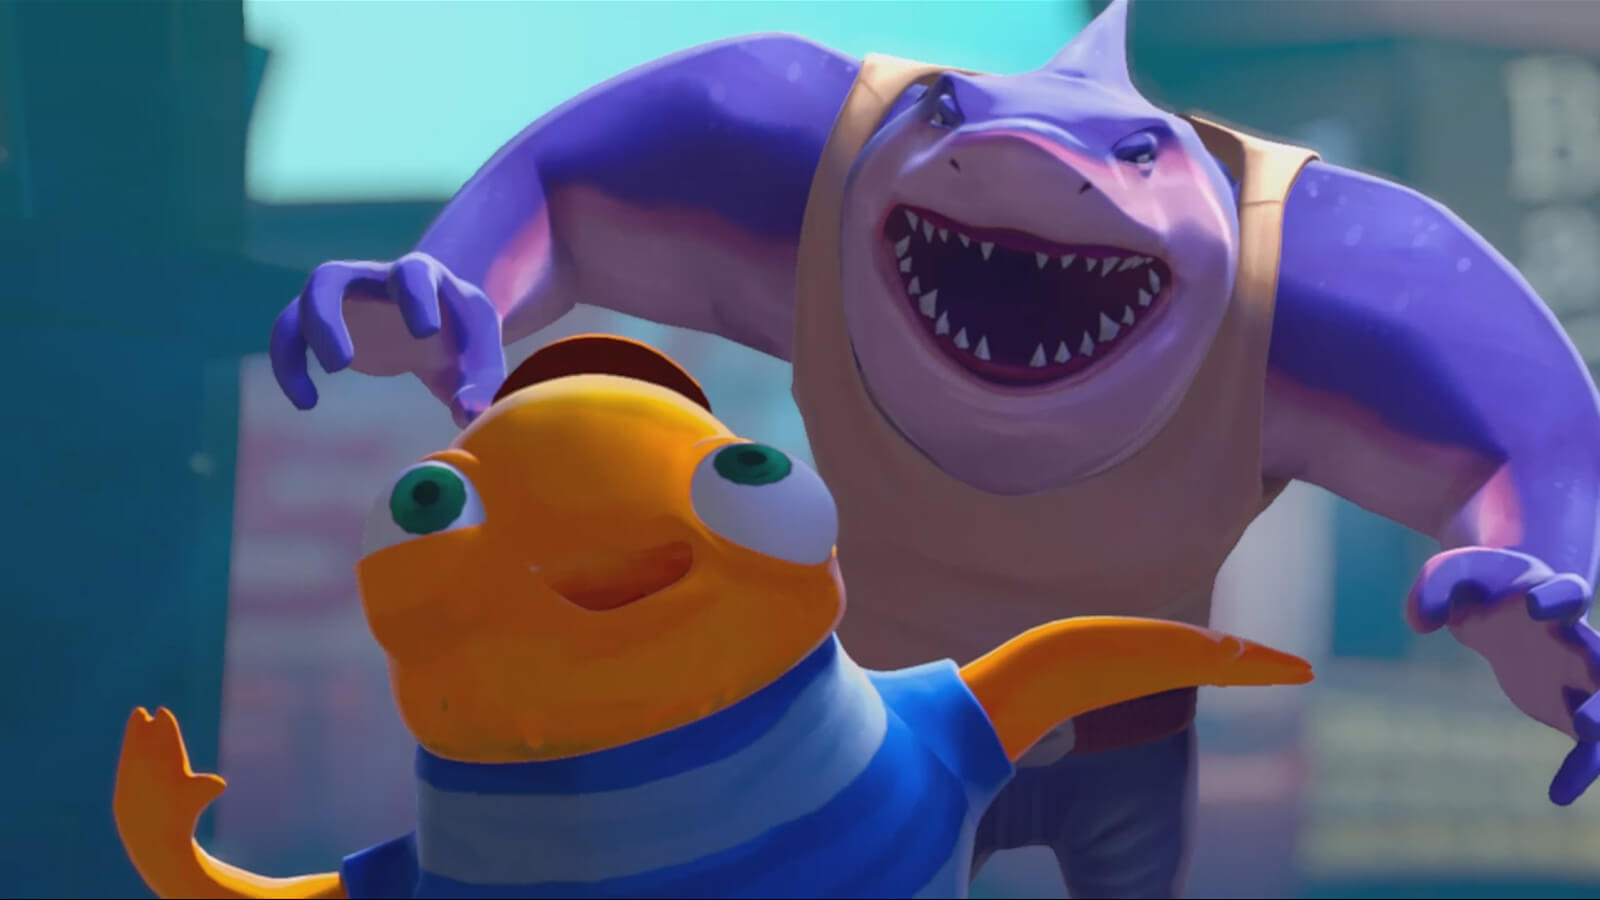 A purple shark in jeans bares his teeth coming up behind a small orange fish in a blue-striped t-shirt